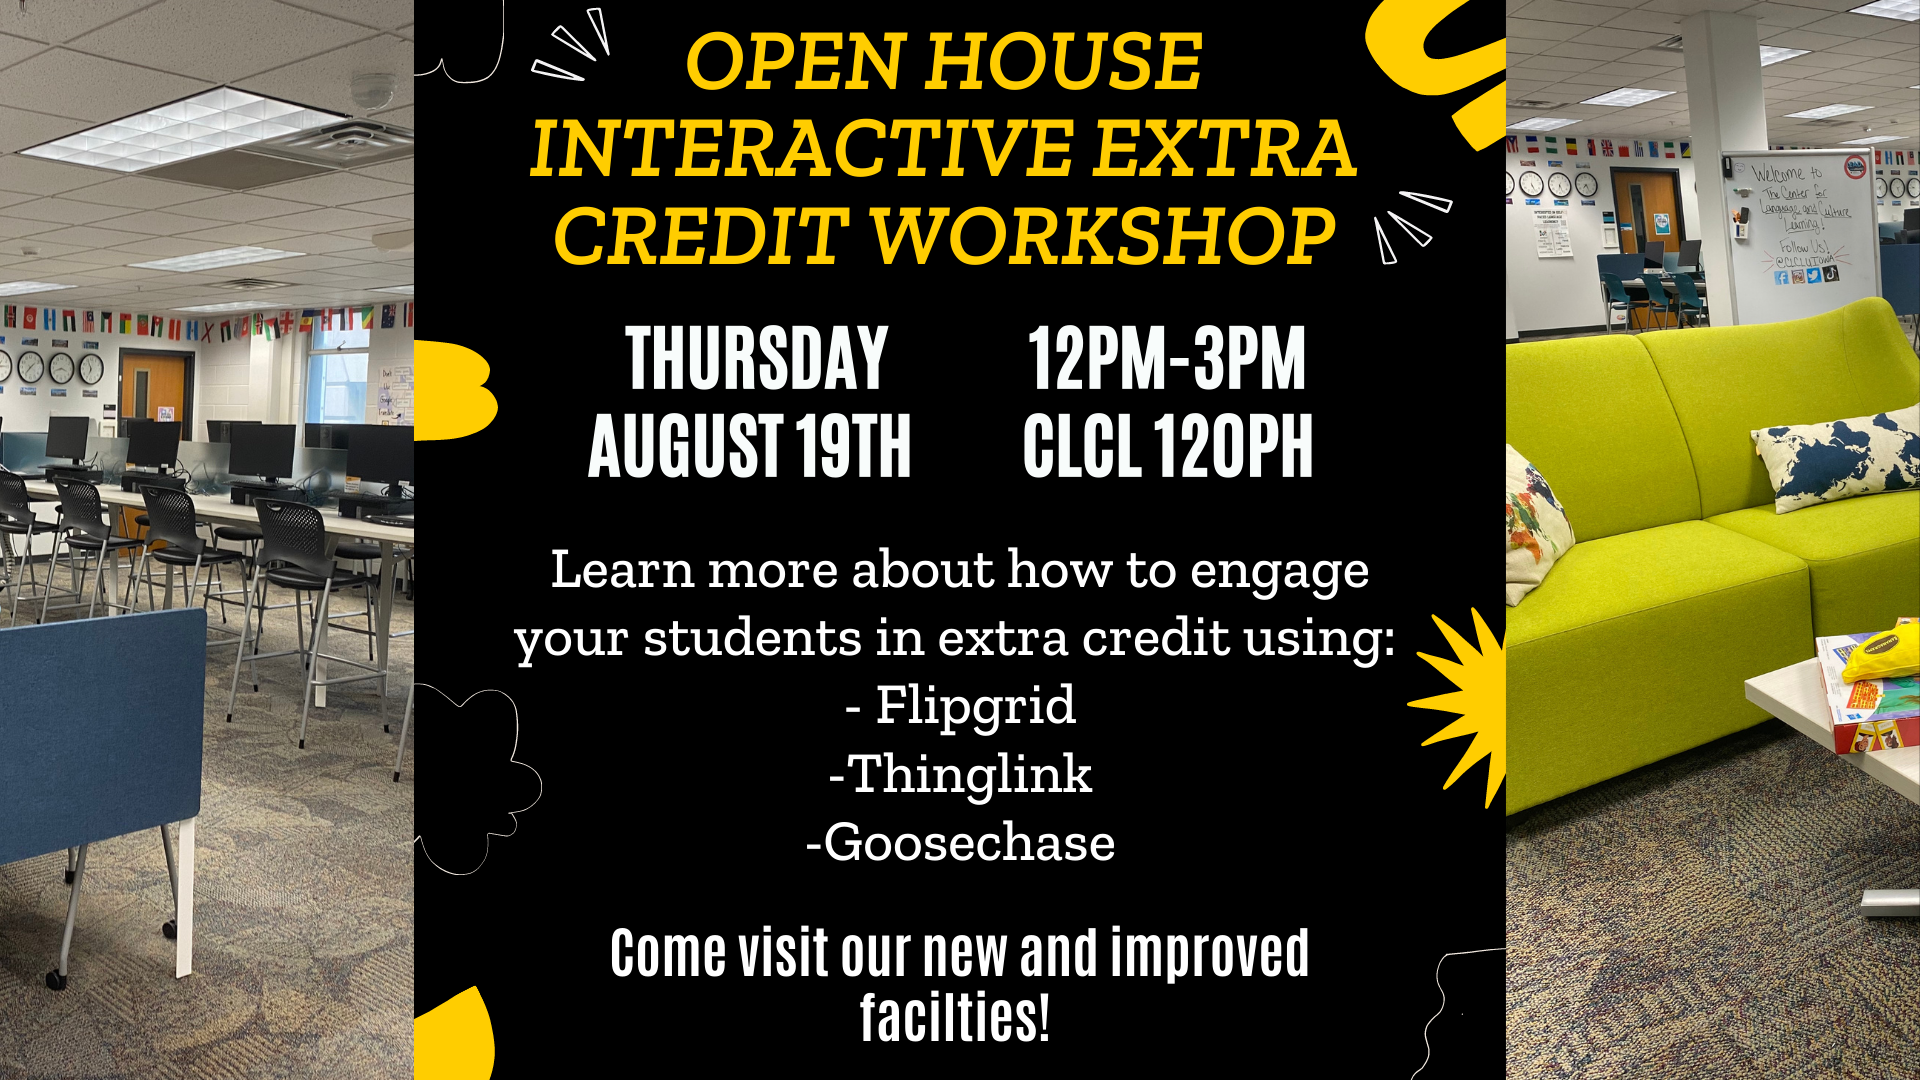 Open house interactive extra credit workshop in the CLCL 120 PH on Thursday August 19th from 12 pm to 3 pm. Learn more about how to engage students in extra credit using flipgrid thinglink and goosechase. Come tour out new and improve facilities! 